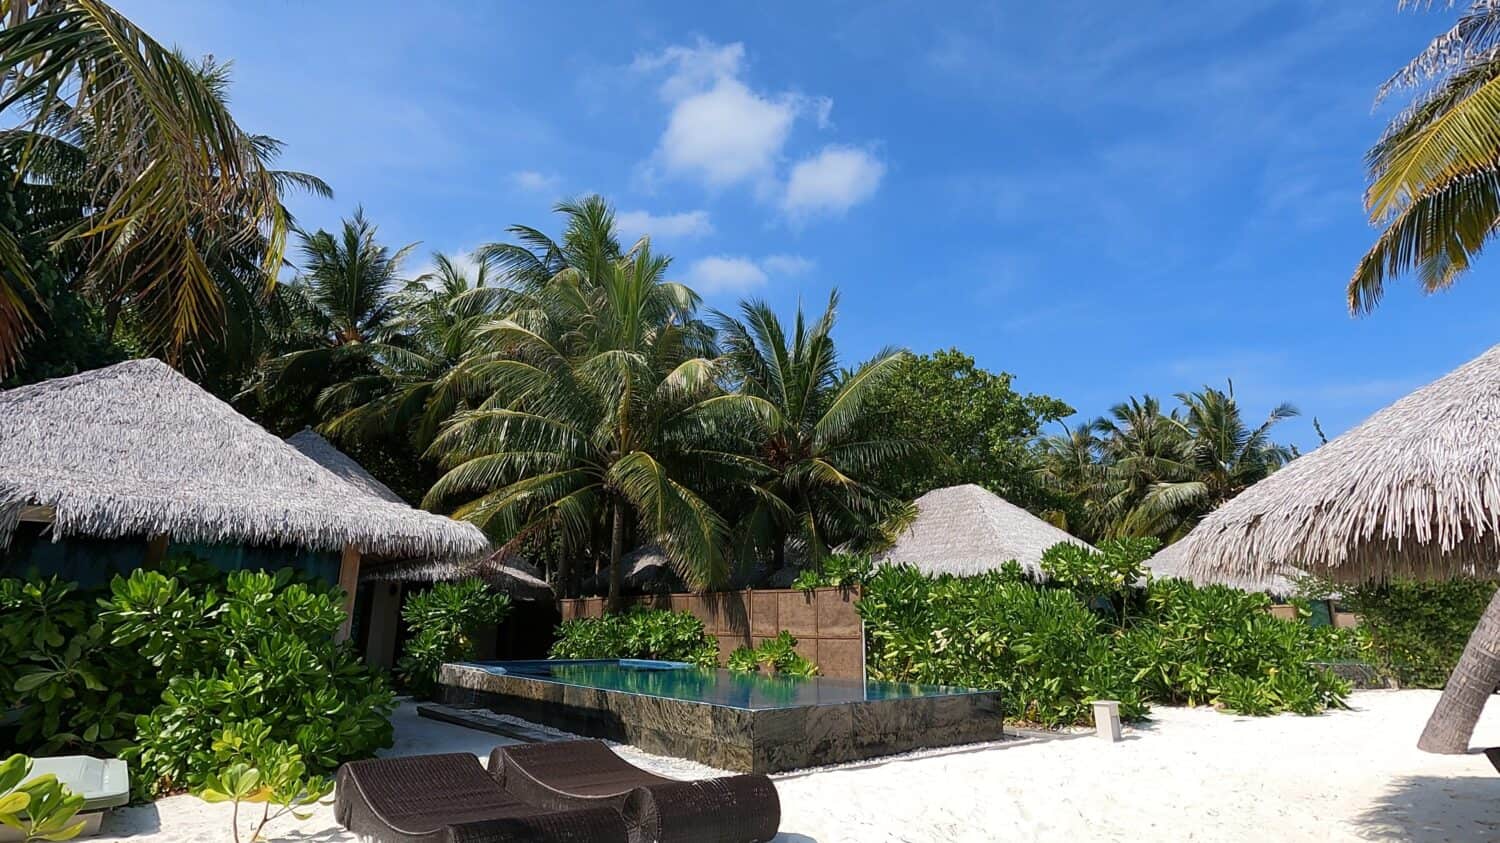 Sunbathing area on the beach, sun loungers and umbrellas. Tropical forest, palm trees, swimming pool. Maldives, beauty, white sand on the beach